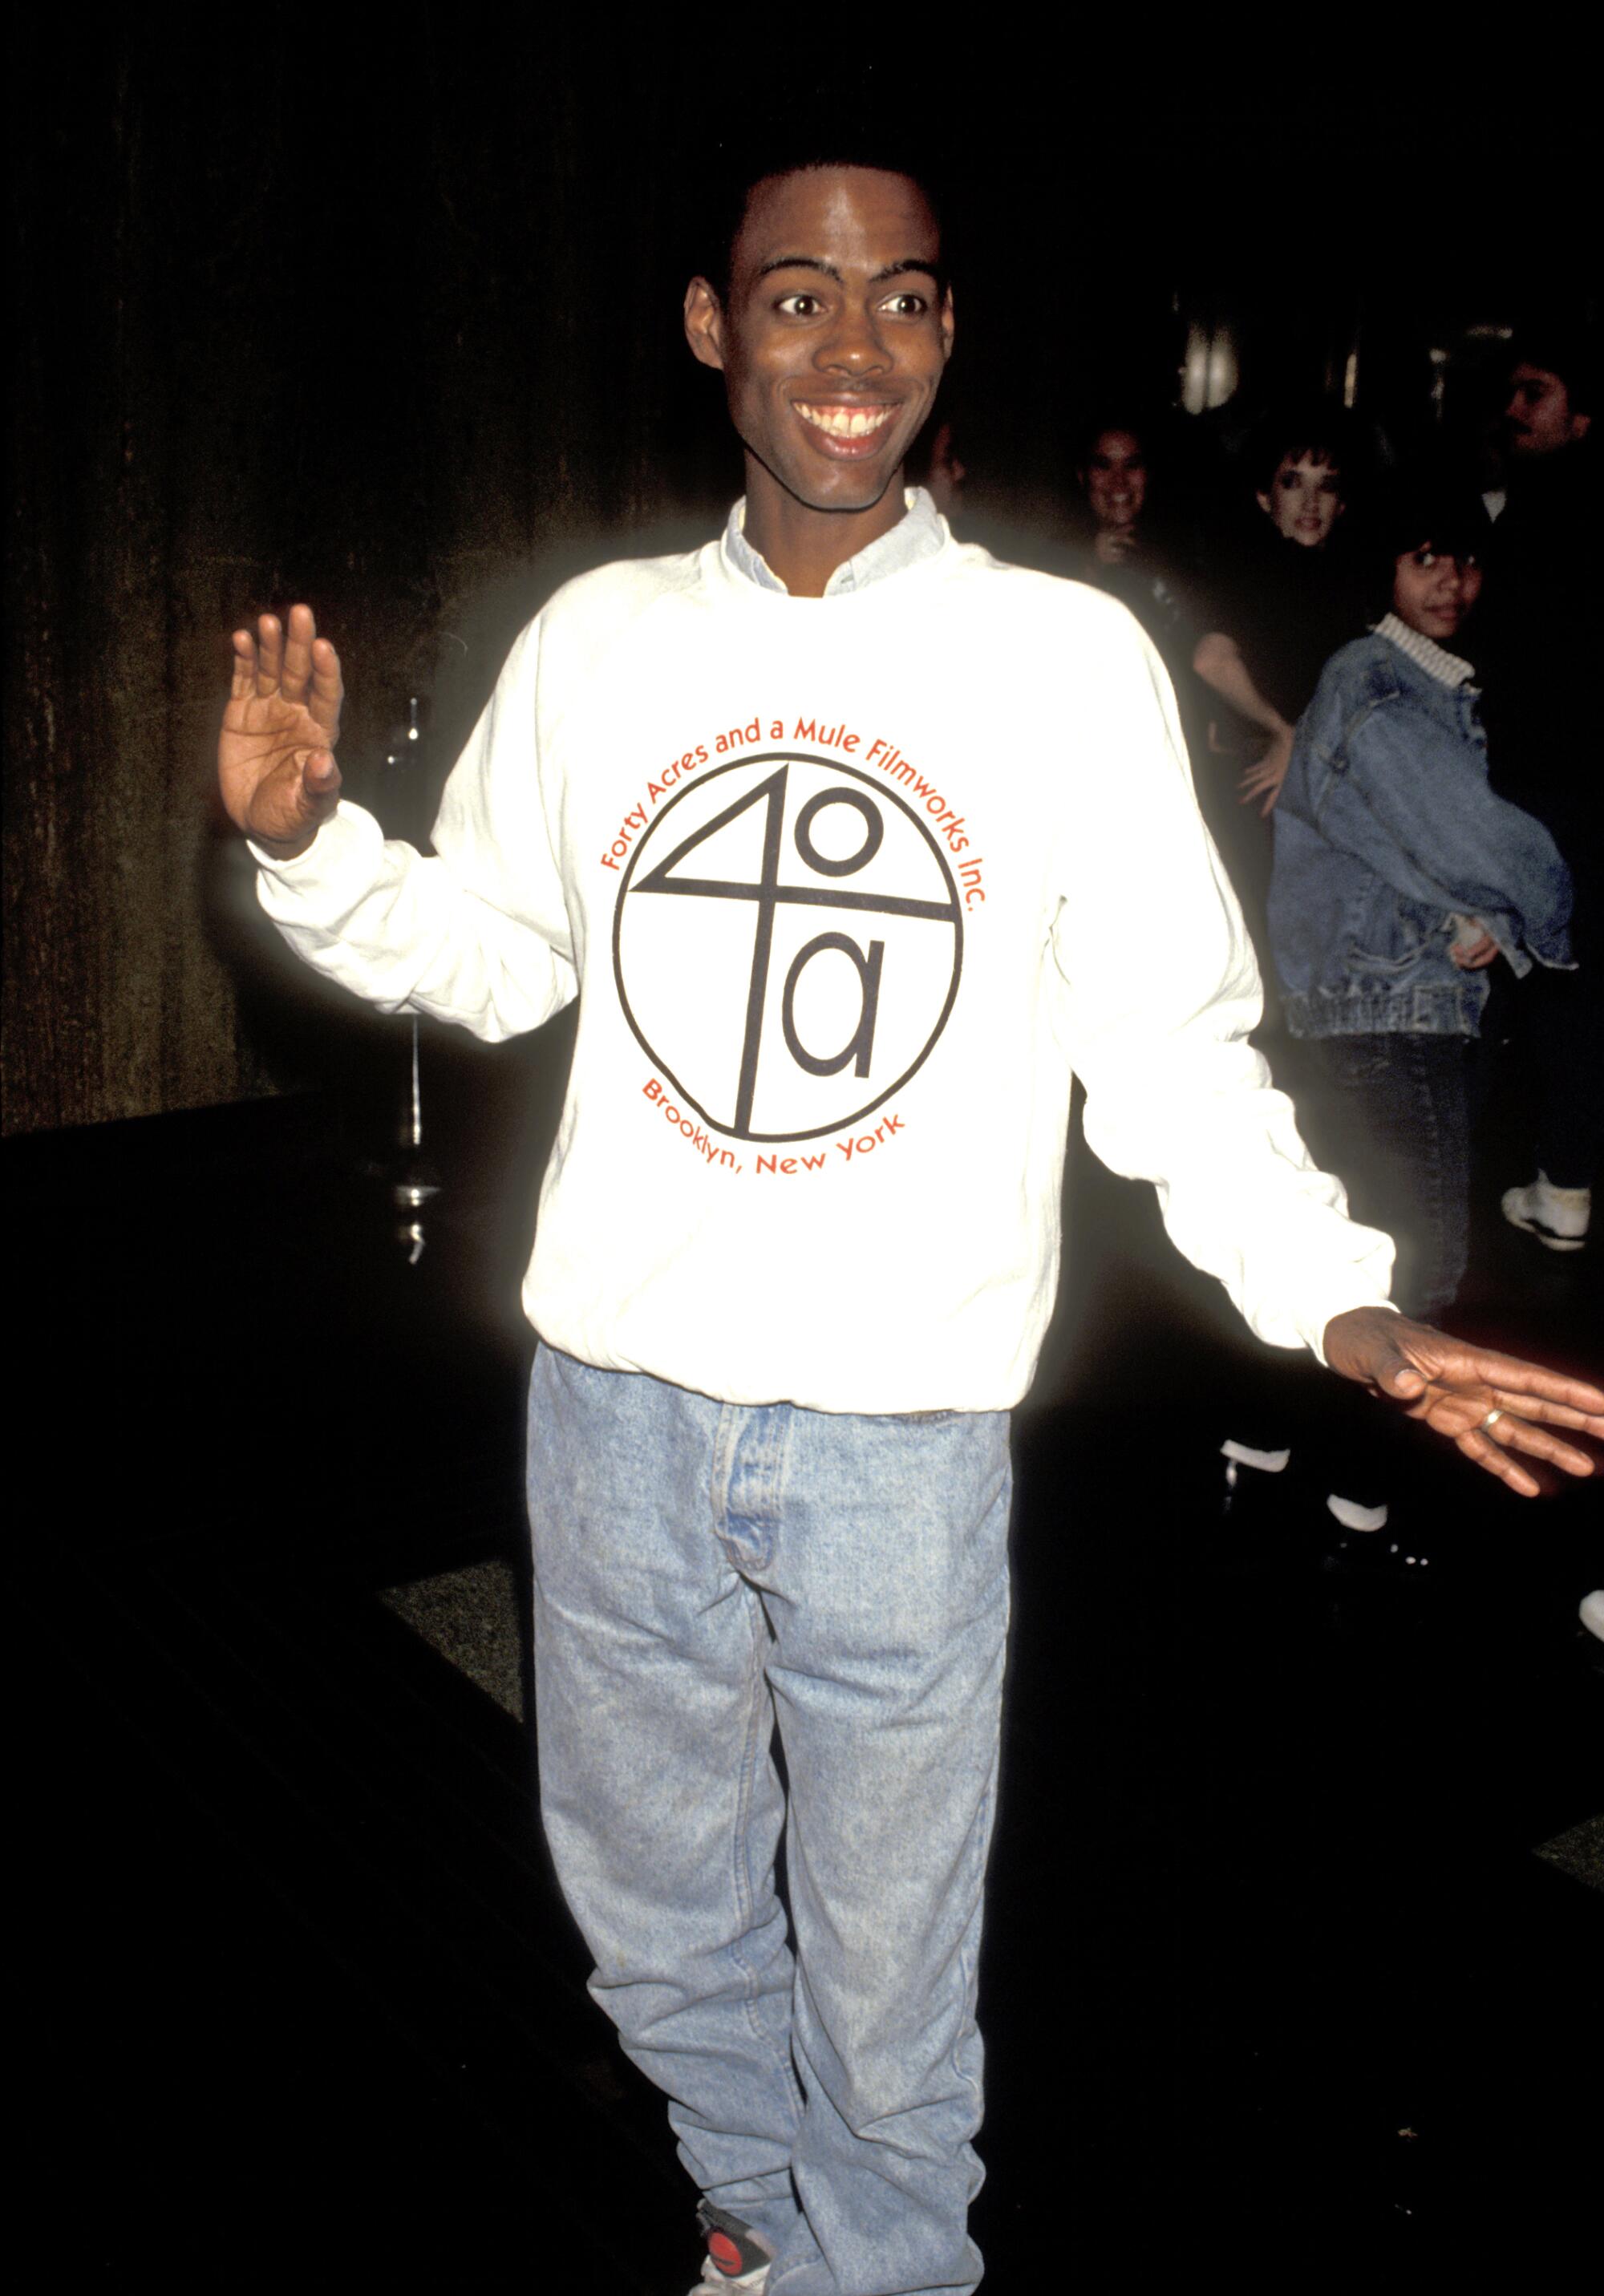 Chris Rock in a white sweatshirt and jeans with arms partially outstretched.